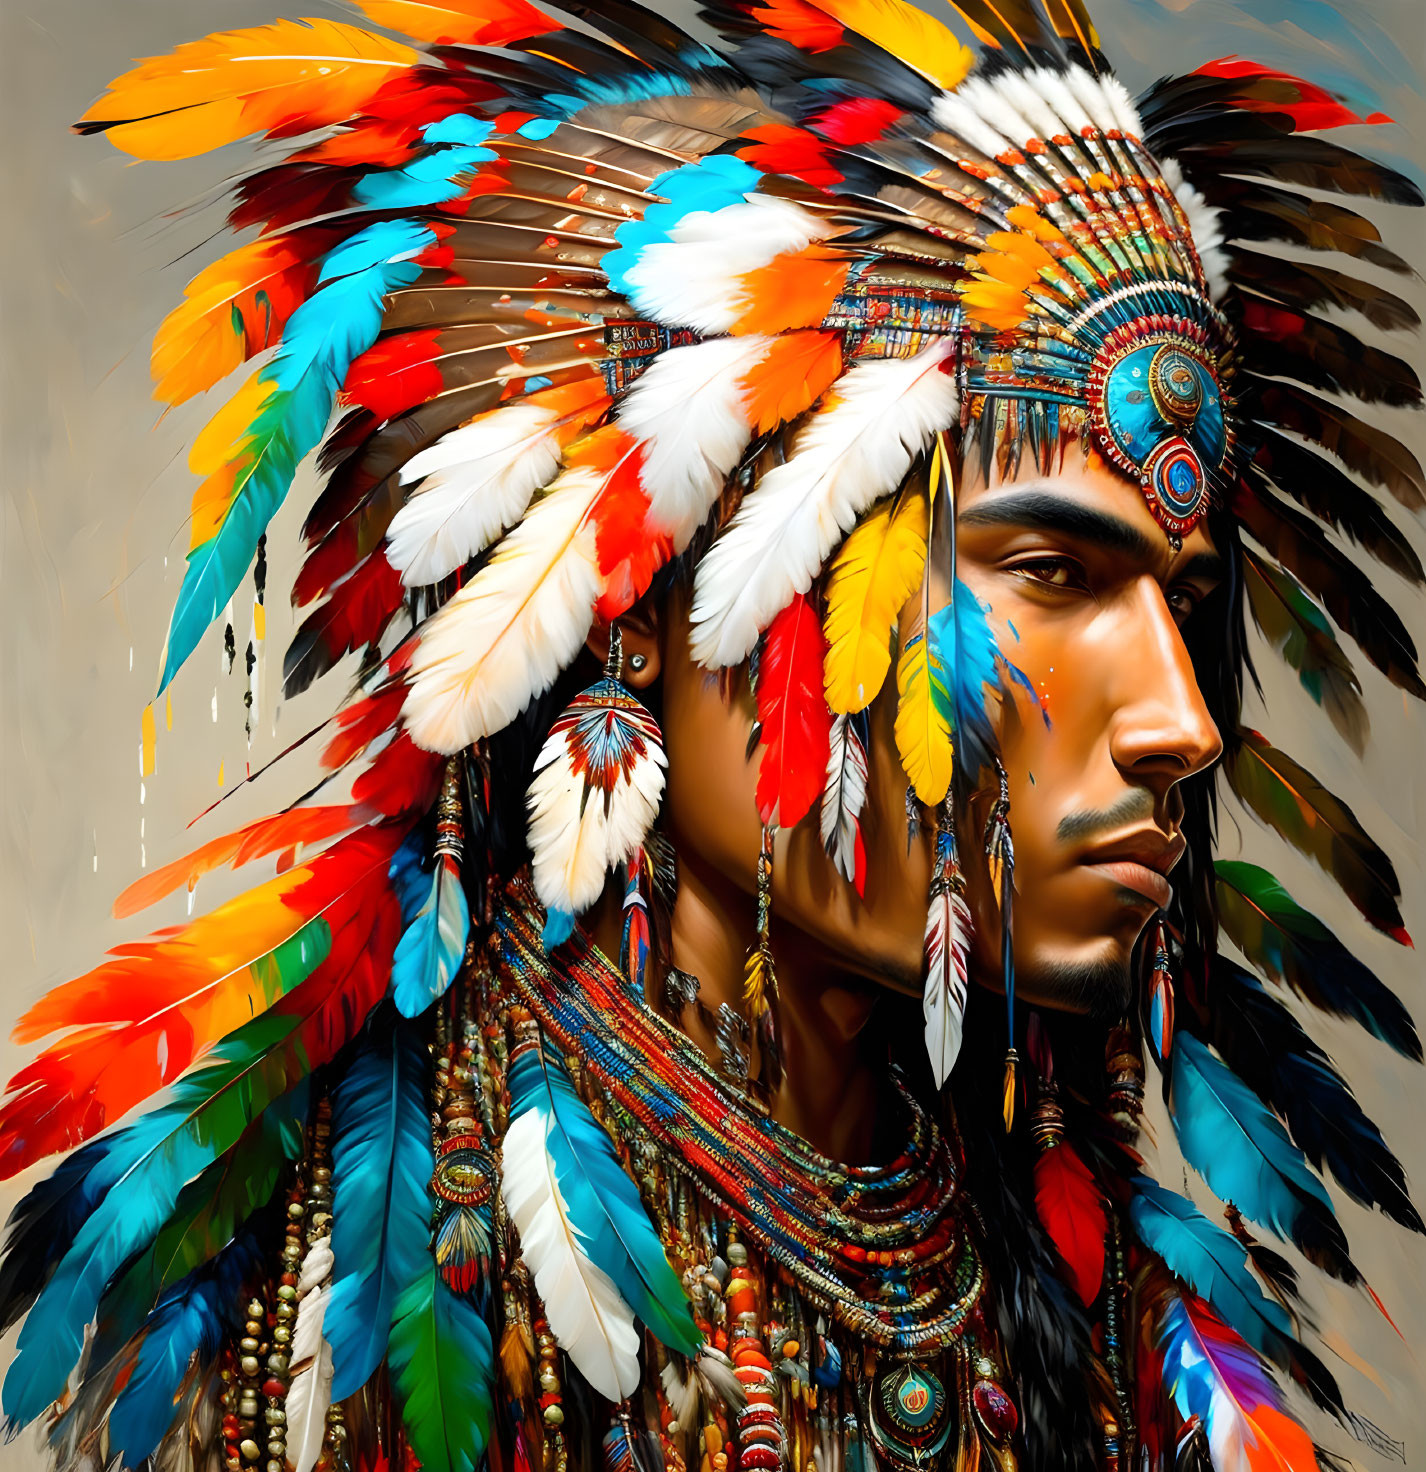 Colorful digital artwork of a person in a Native American headdress